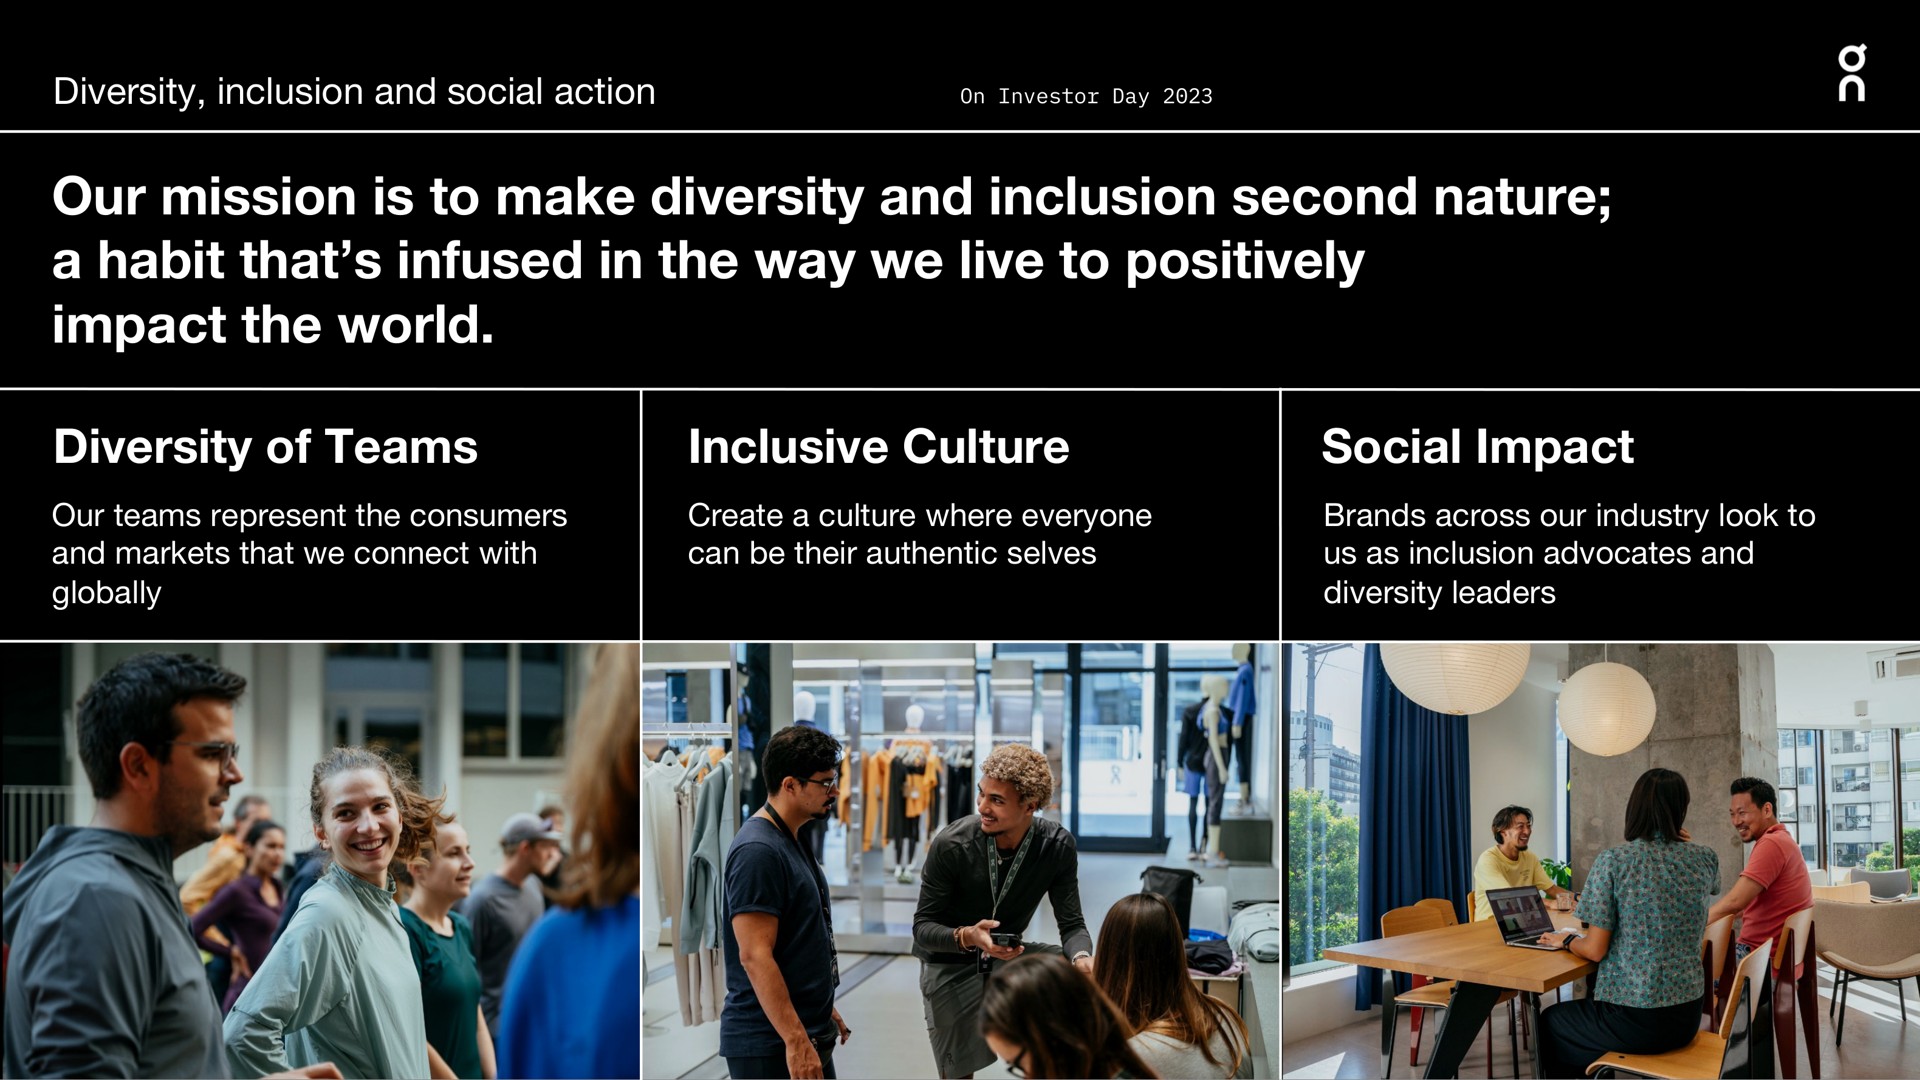 diversity inclusion and social action our mission is to make diversity and inclusion second nature a habit that infused in the way we live to positively impact the world diversity of teams inclusive culture social impact our teams represent the consumers and markets that we connect with globally create a culture where everyone can be their authentic selves brands across our industry look to us as inclusion advocates and diversity leaders ors era | On Holding